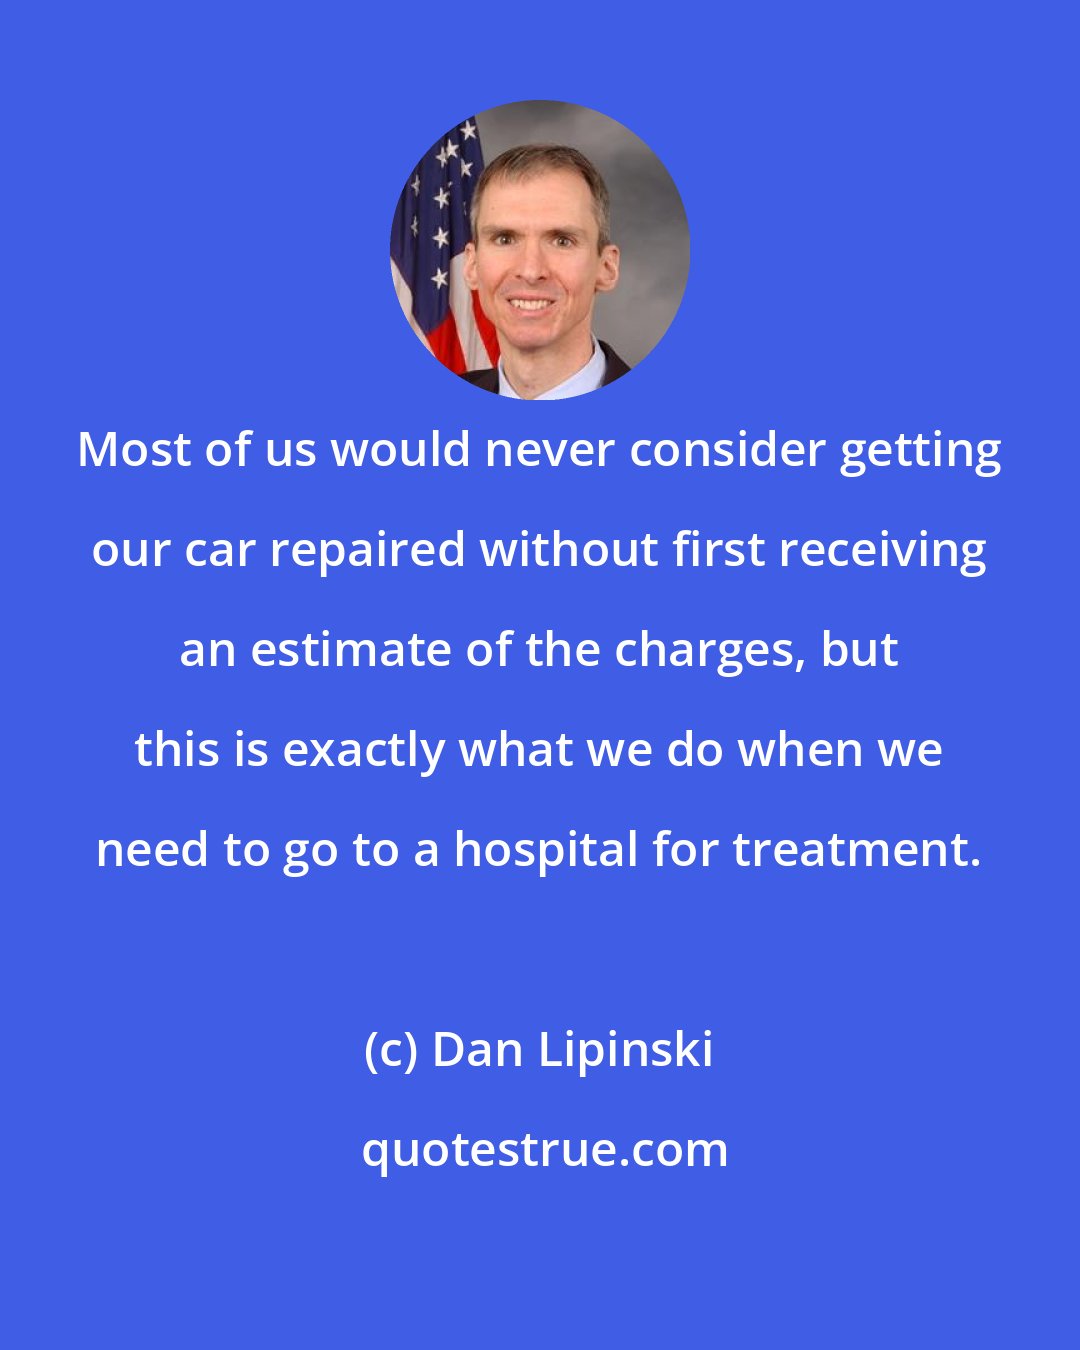 Dan Lipinski: Most of us would never consider getting our car repaired without first receiving an estimate of the charges, but this is exactly what we do when we need to go to a hospital for treatment.